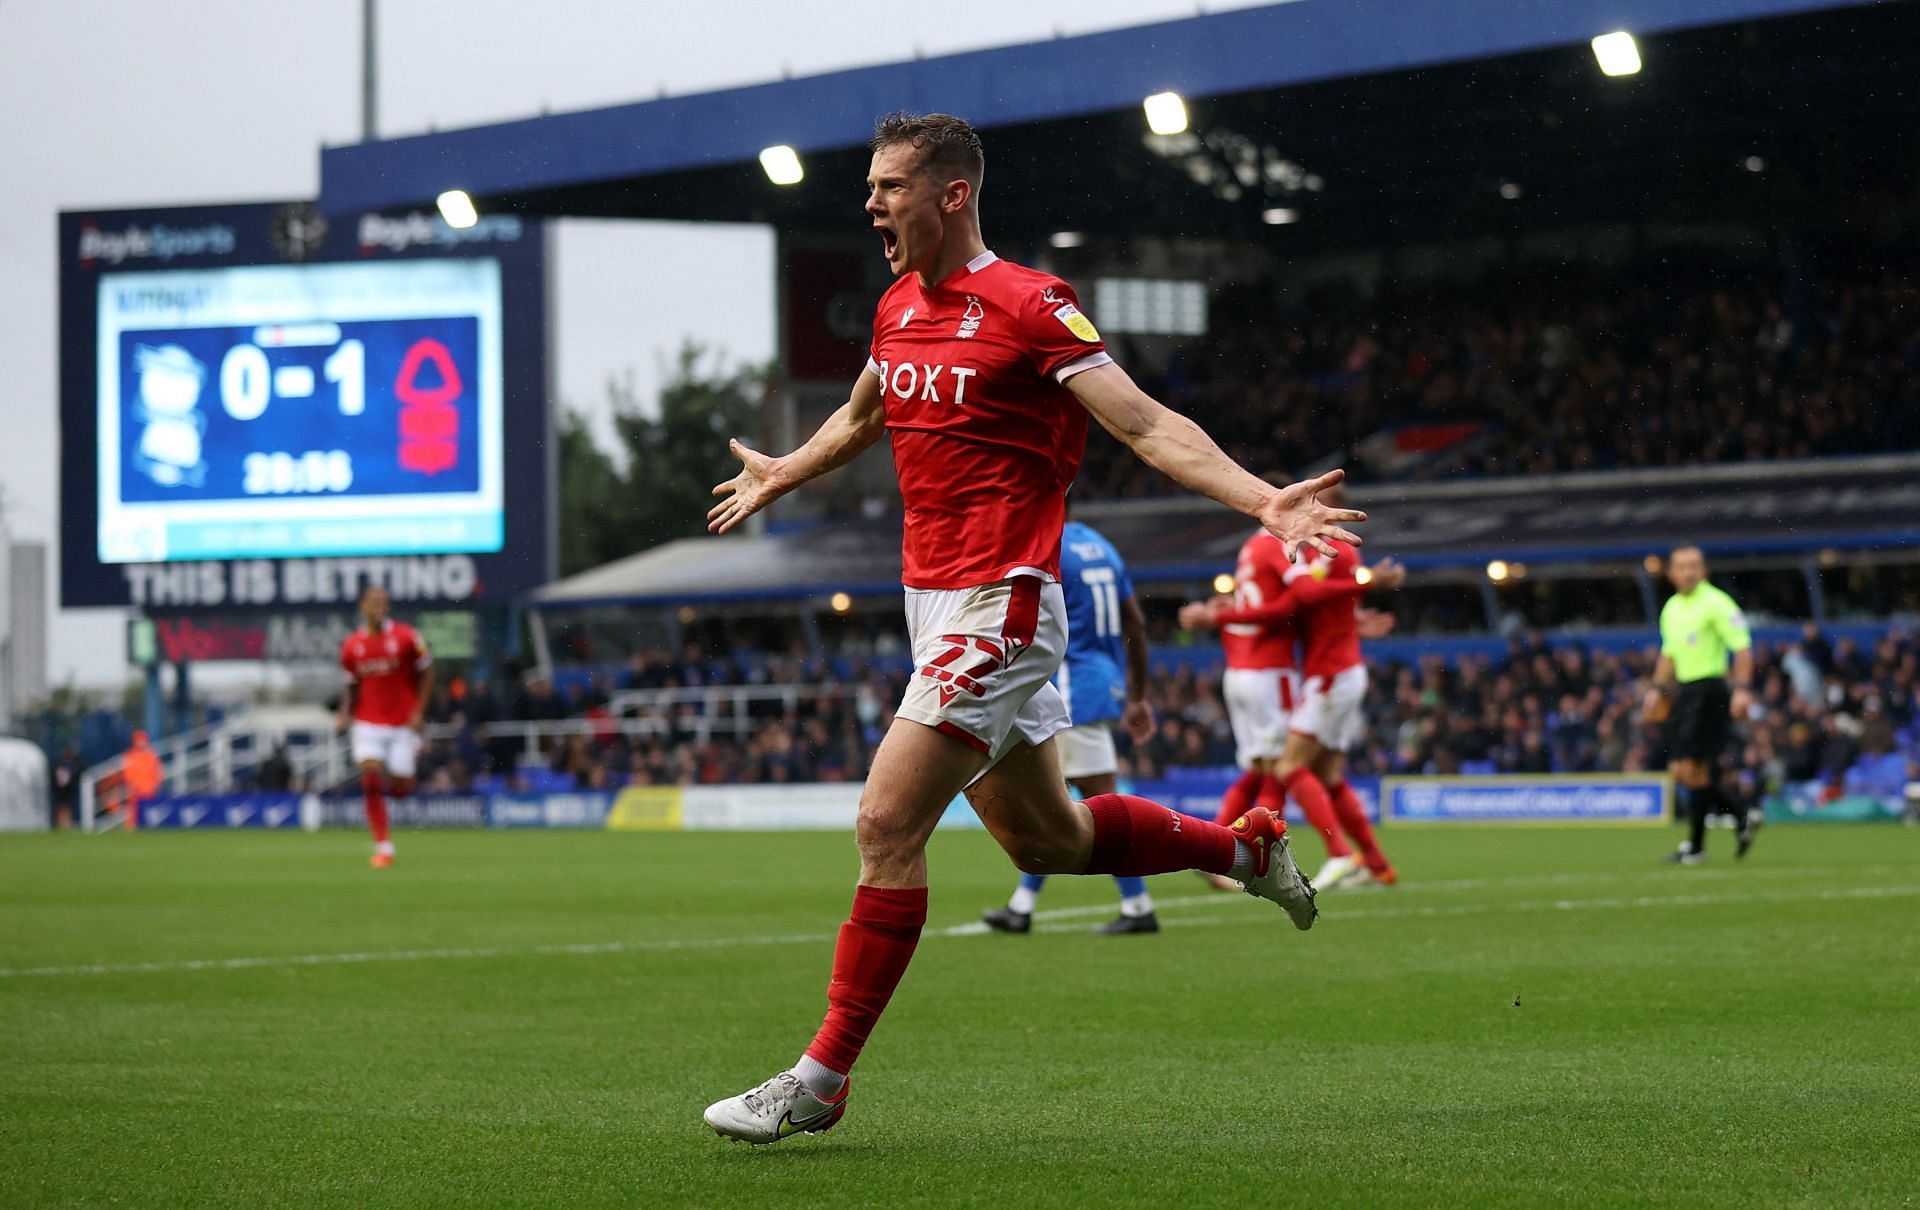 Yates will be a huge miss for Forest